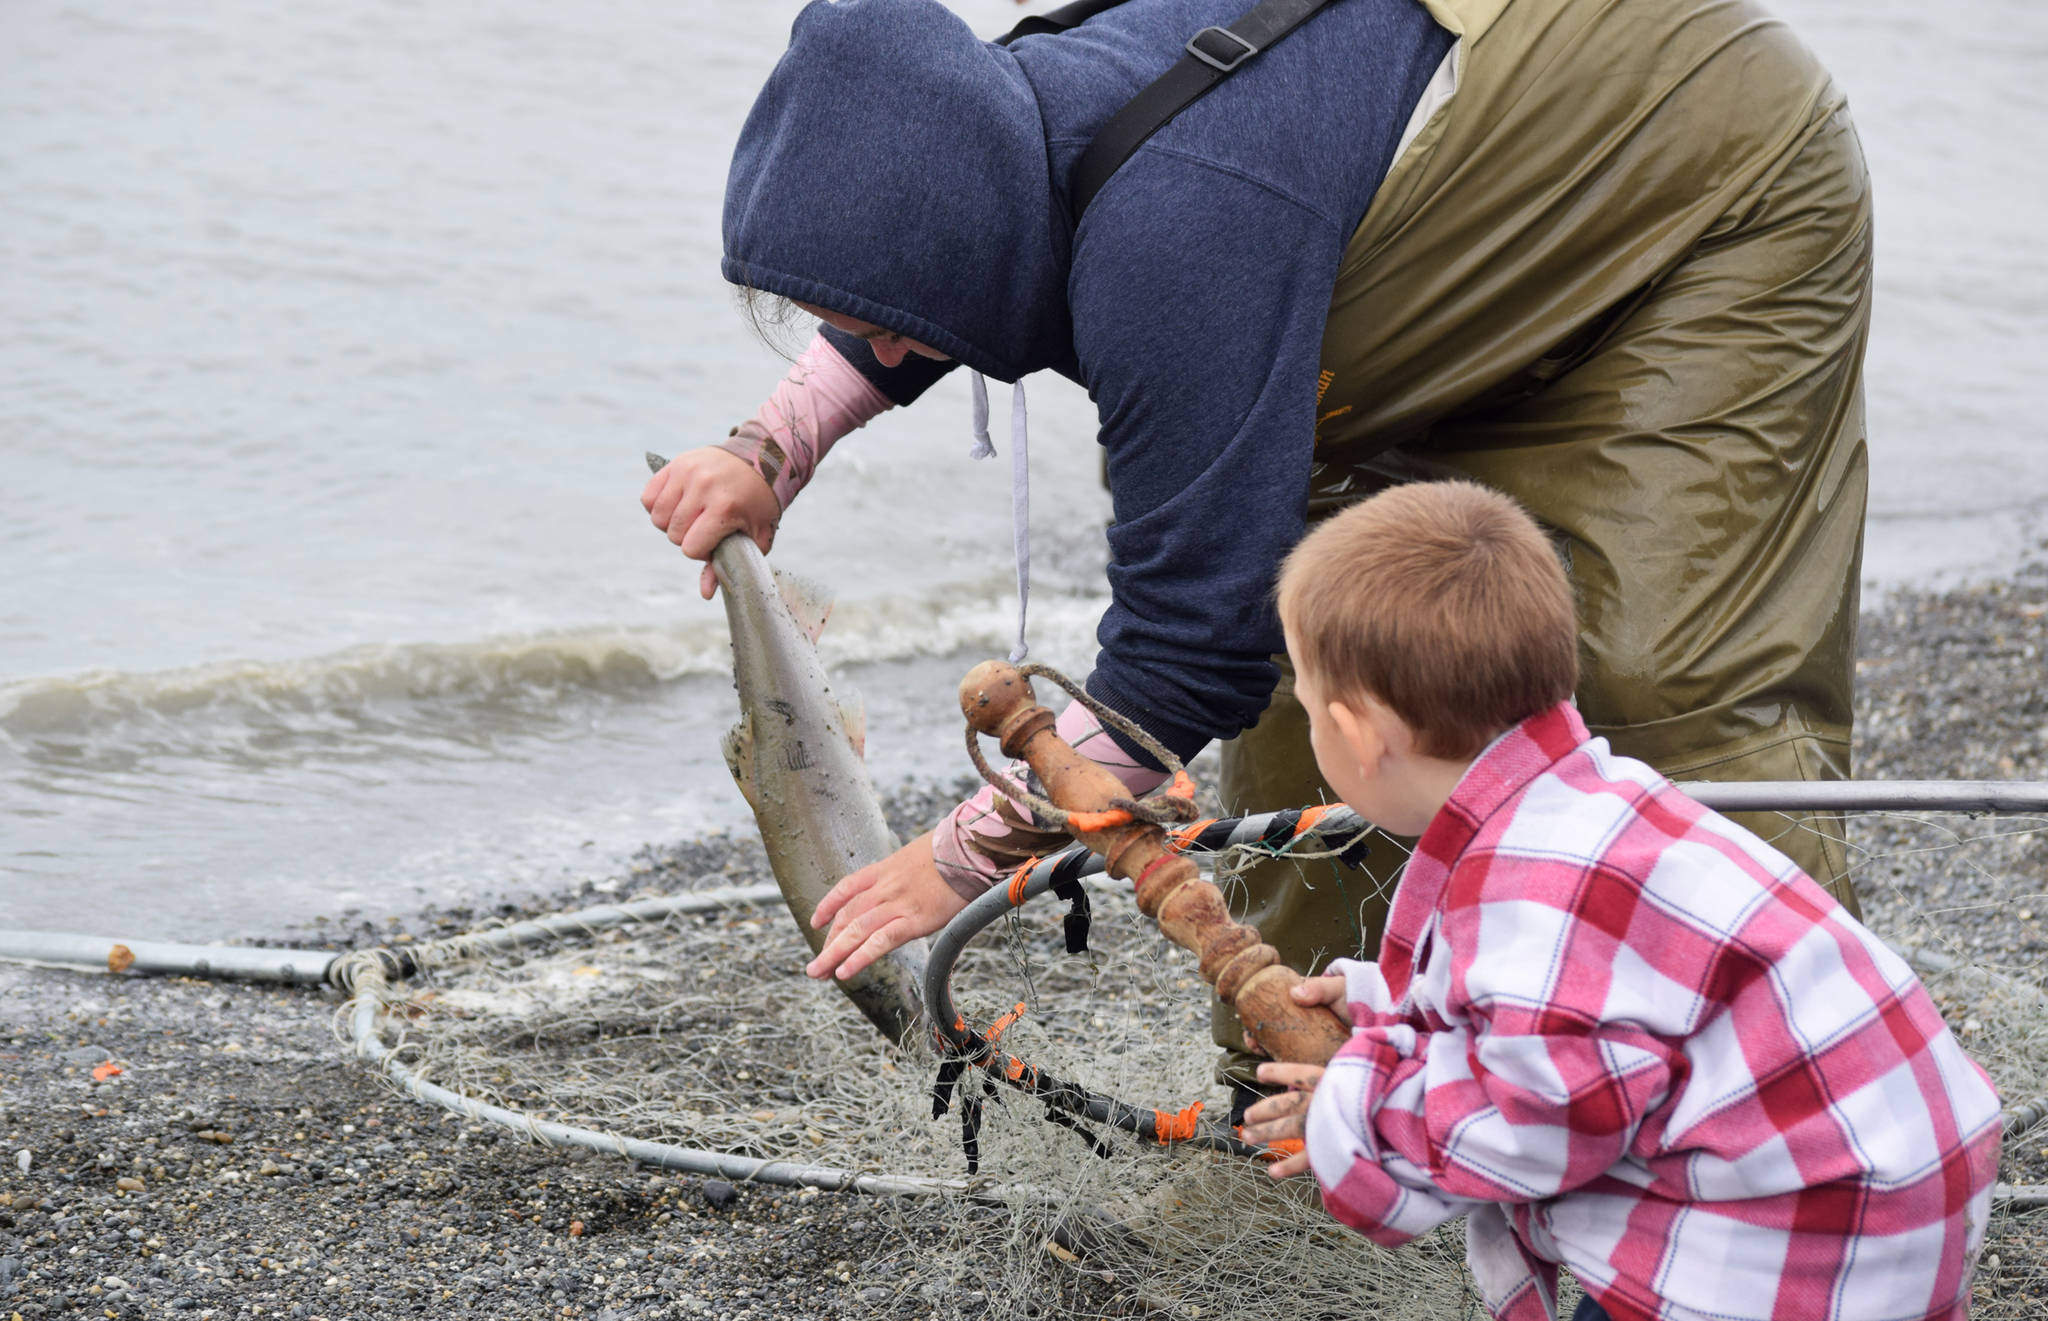 Onya Pate (left) of Soldotna lifts a sockeye salmon she caught in the Kasilof River from her dipnet while her son Epic Lee (right) hands her a bonker on Tuesday, July 31, 2018 in Kasilof, Alaska. (Photo by Elizabeth Earl/Peninsula Clarion)